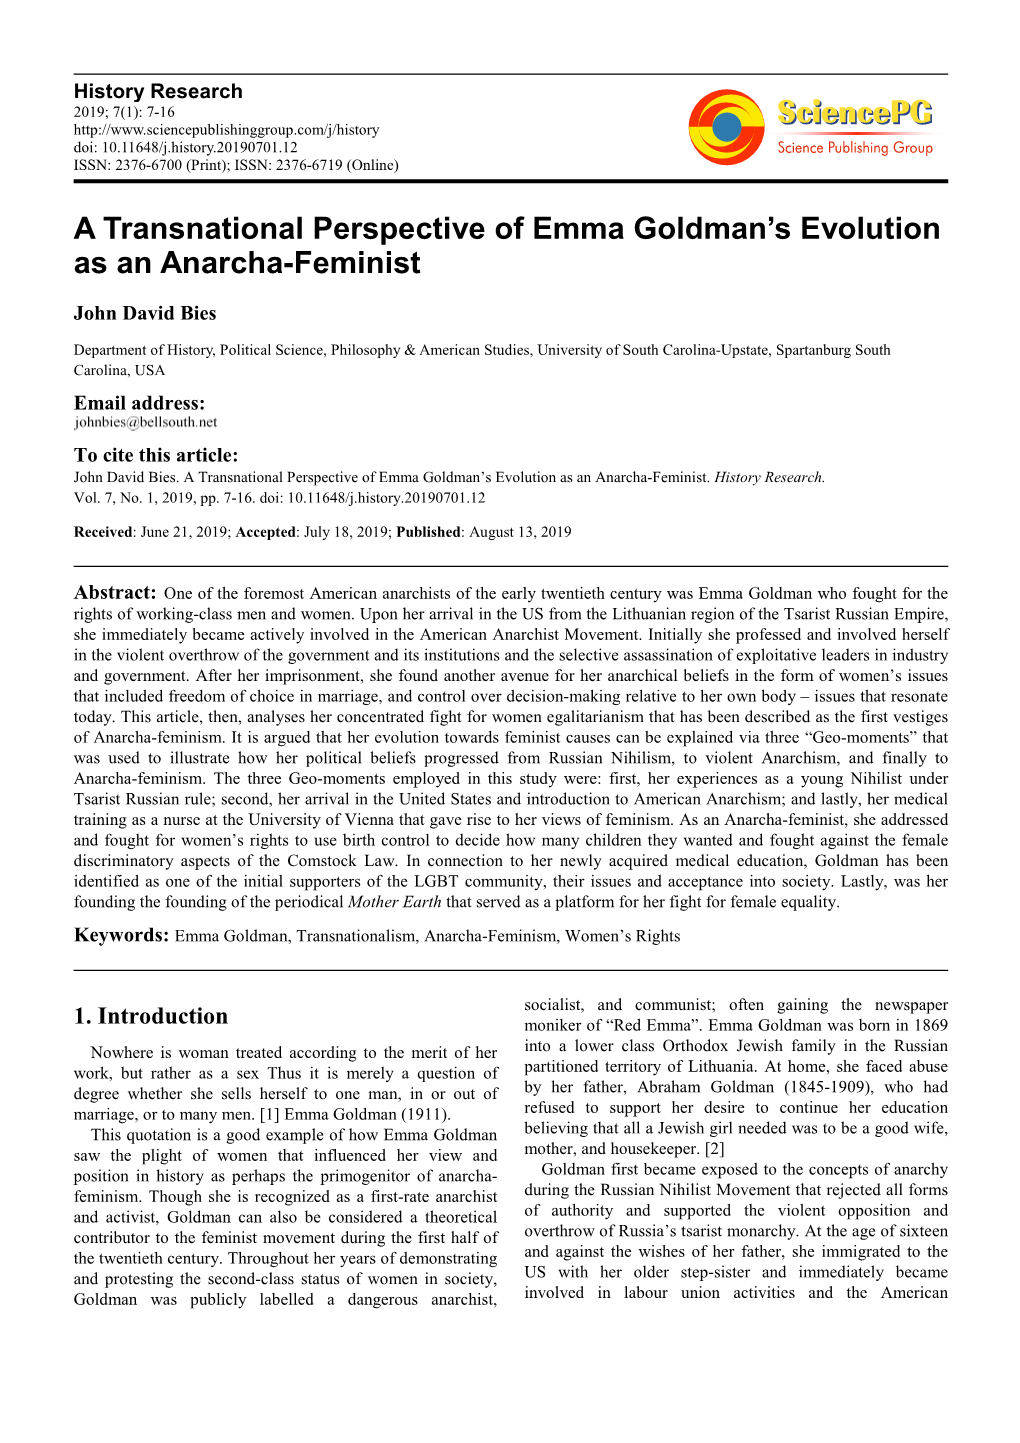 A Transnational Perspective of Emma Goldman's Evolution As an Anarcha